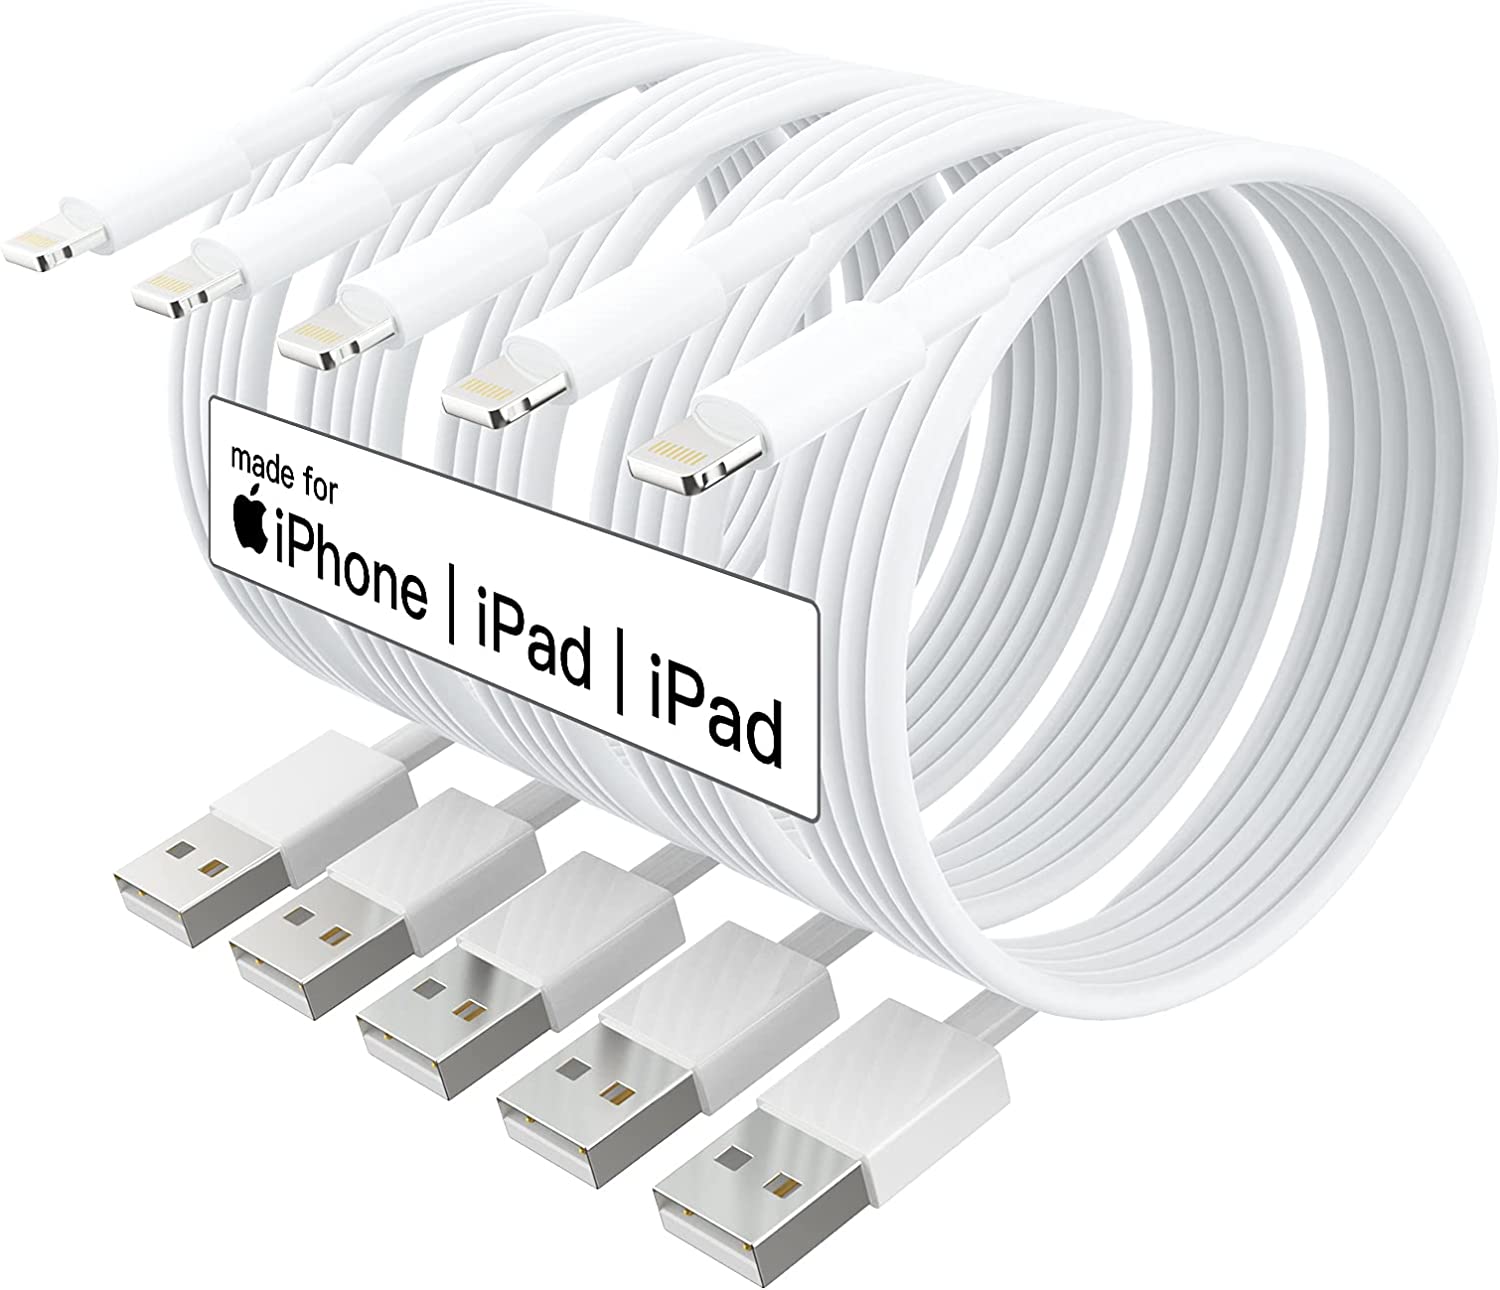 FEEL2NICE High Speed Upgraded iPhone Charger Cords, 5-Pack